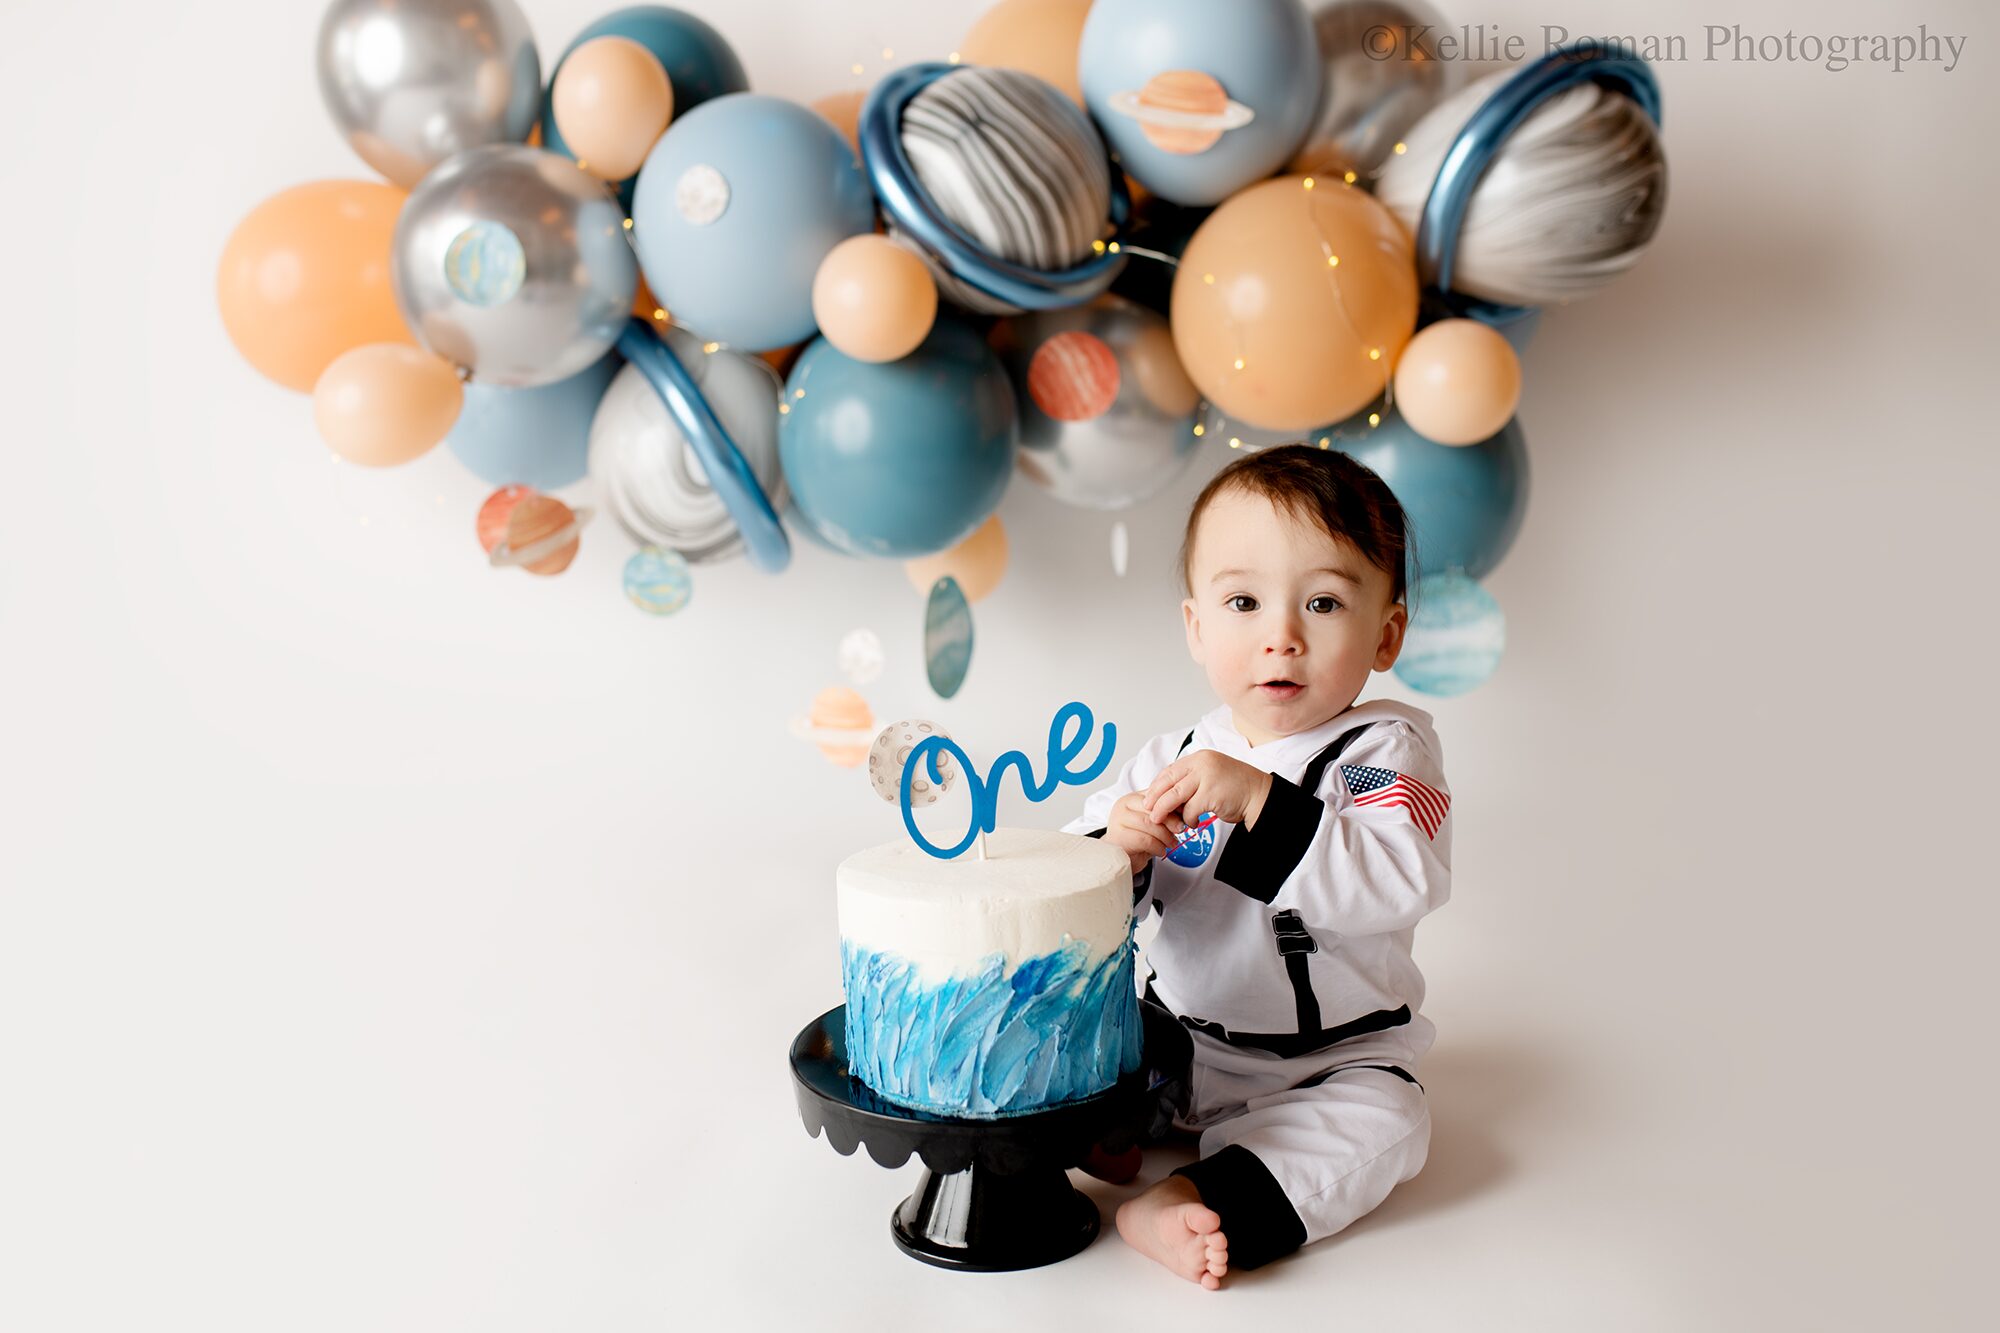 space cake smash. one year old boy in greendale photography studio. boy is wearing an astronaut outfit sitting behind a blue and white cake with a blue one on the top. the floor and backdrop is white with a blue, silver, and beige balloon garland. there are small lights in the balloons and space cut outs.